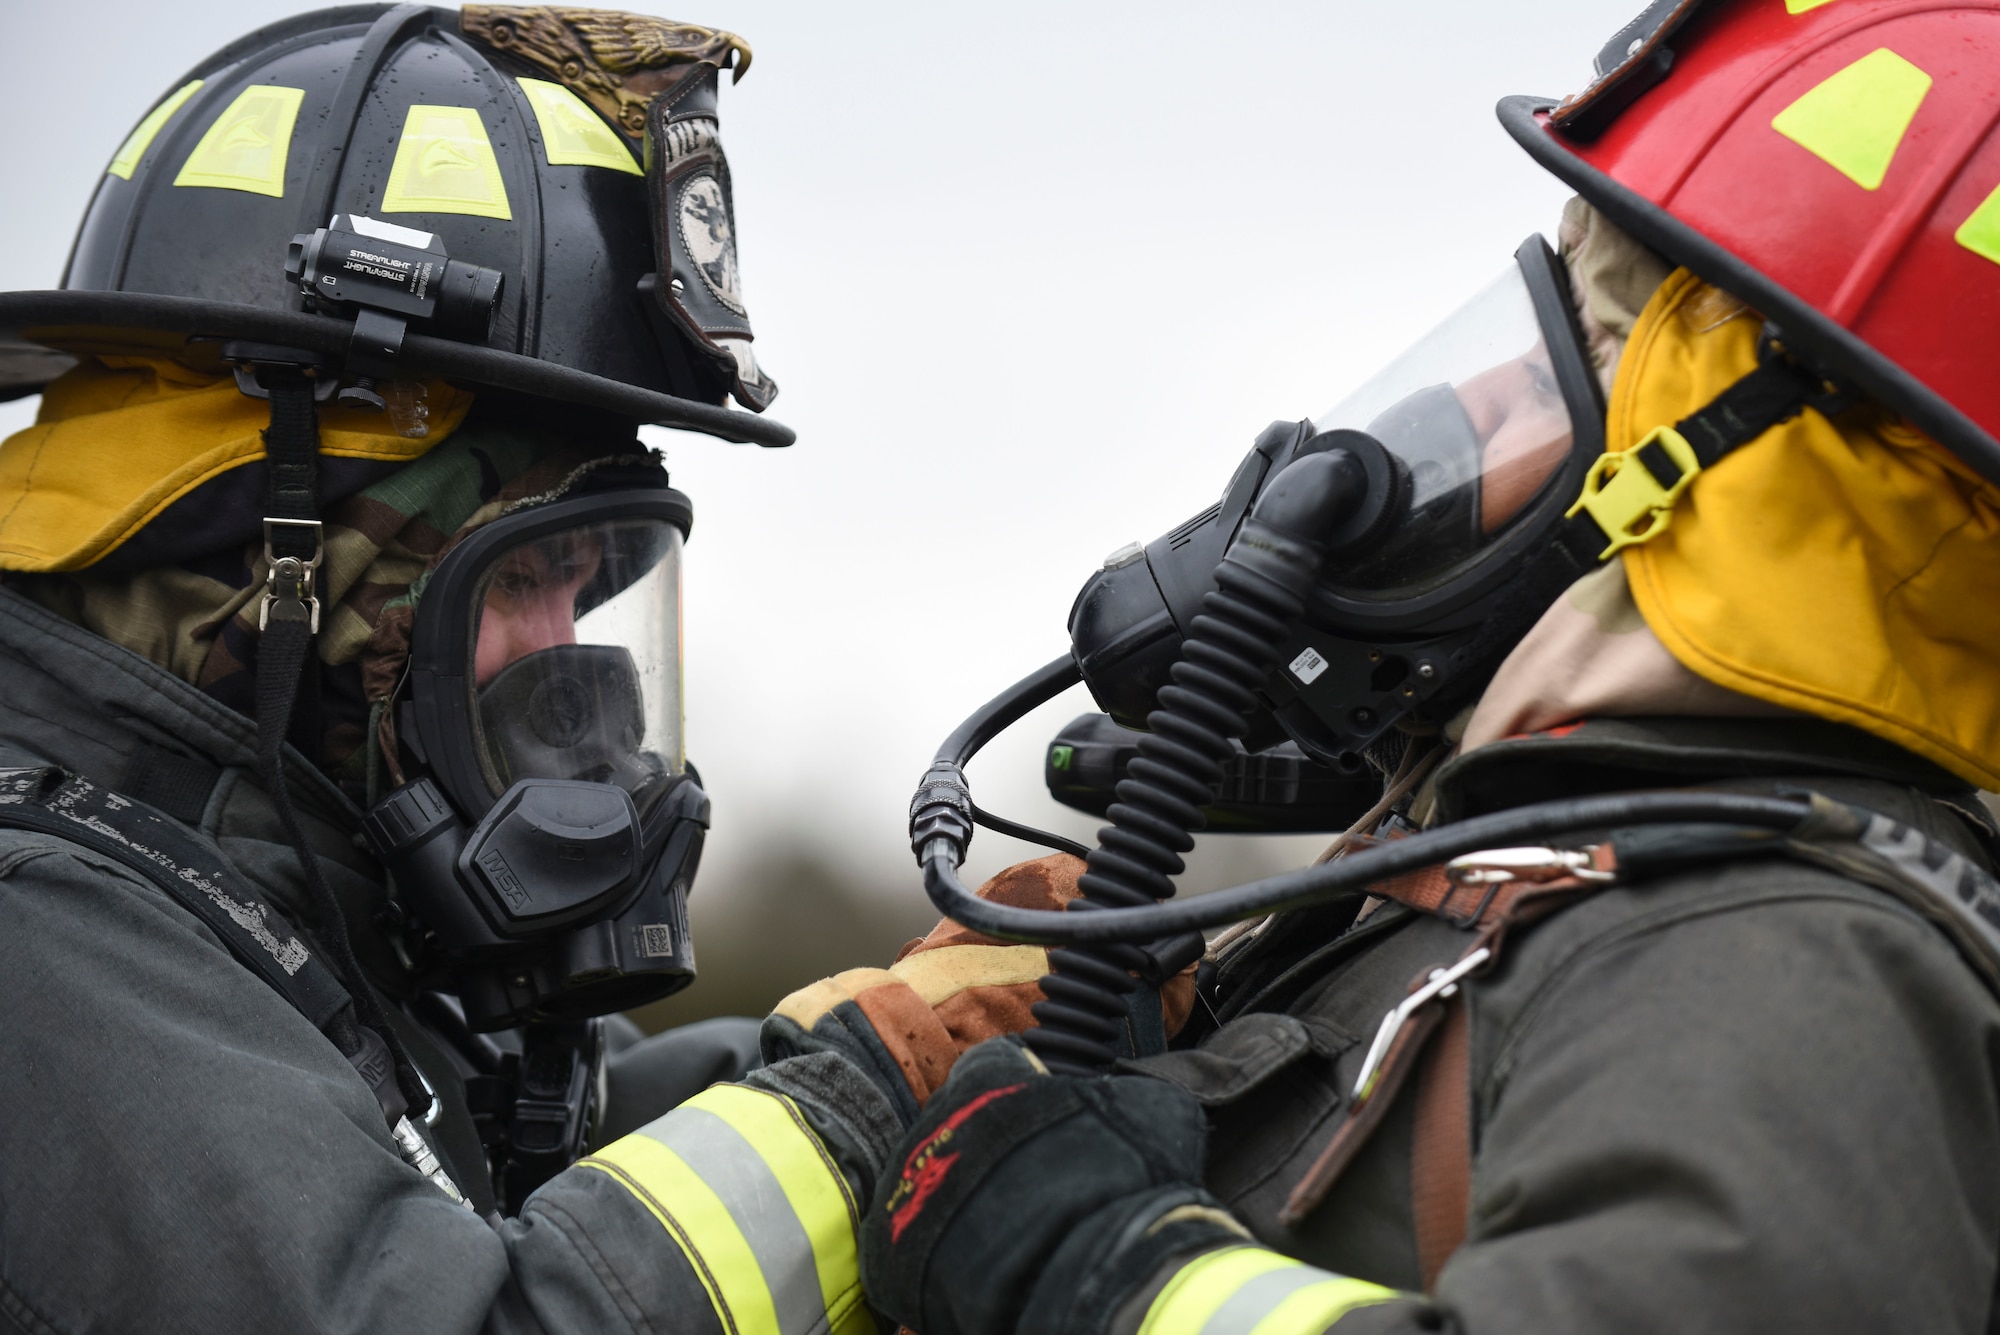 Two male firefighters make adjustments to their equipment